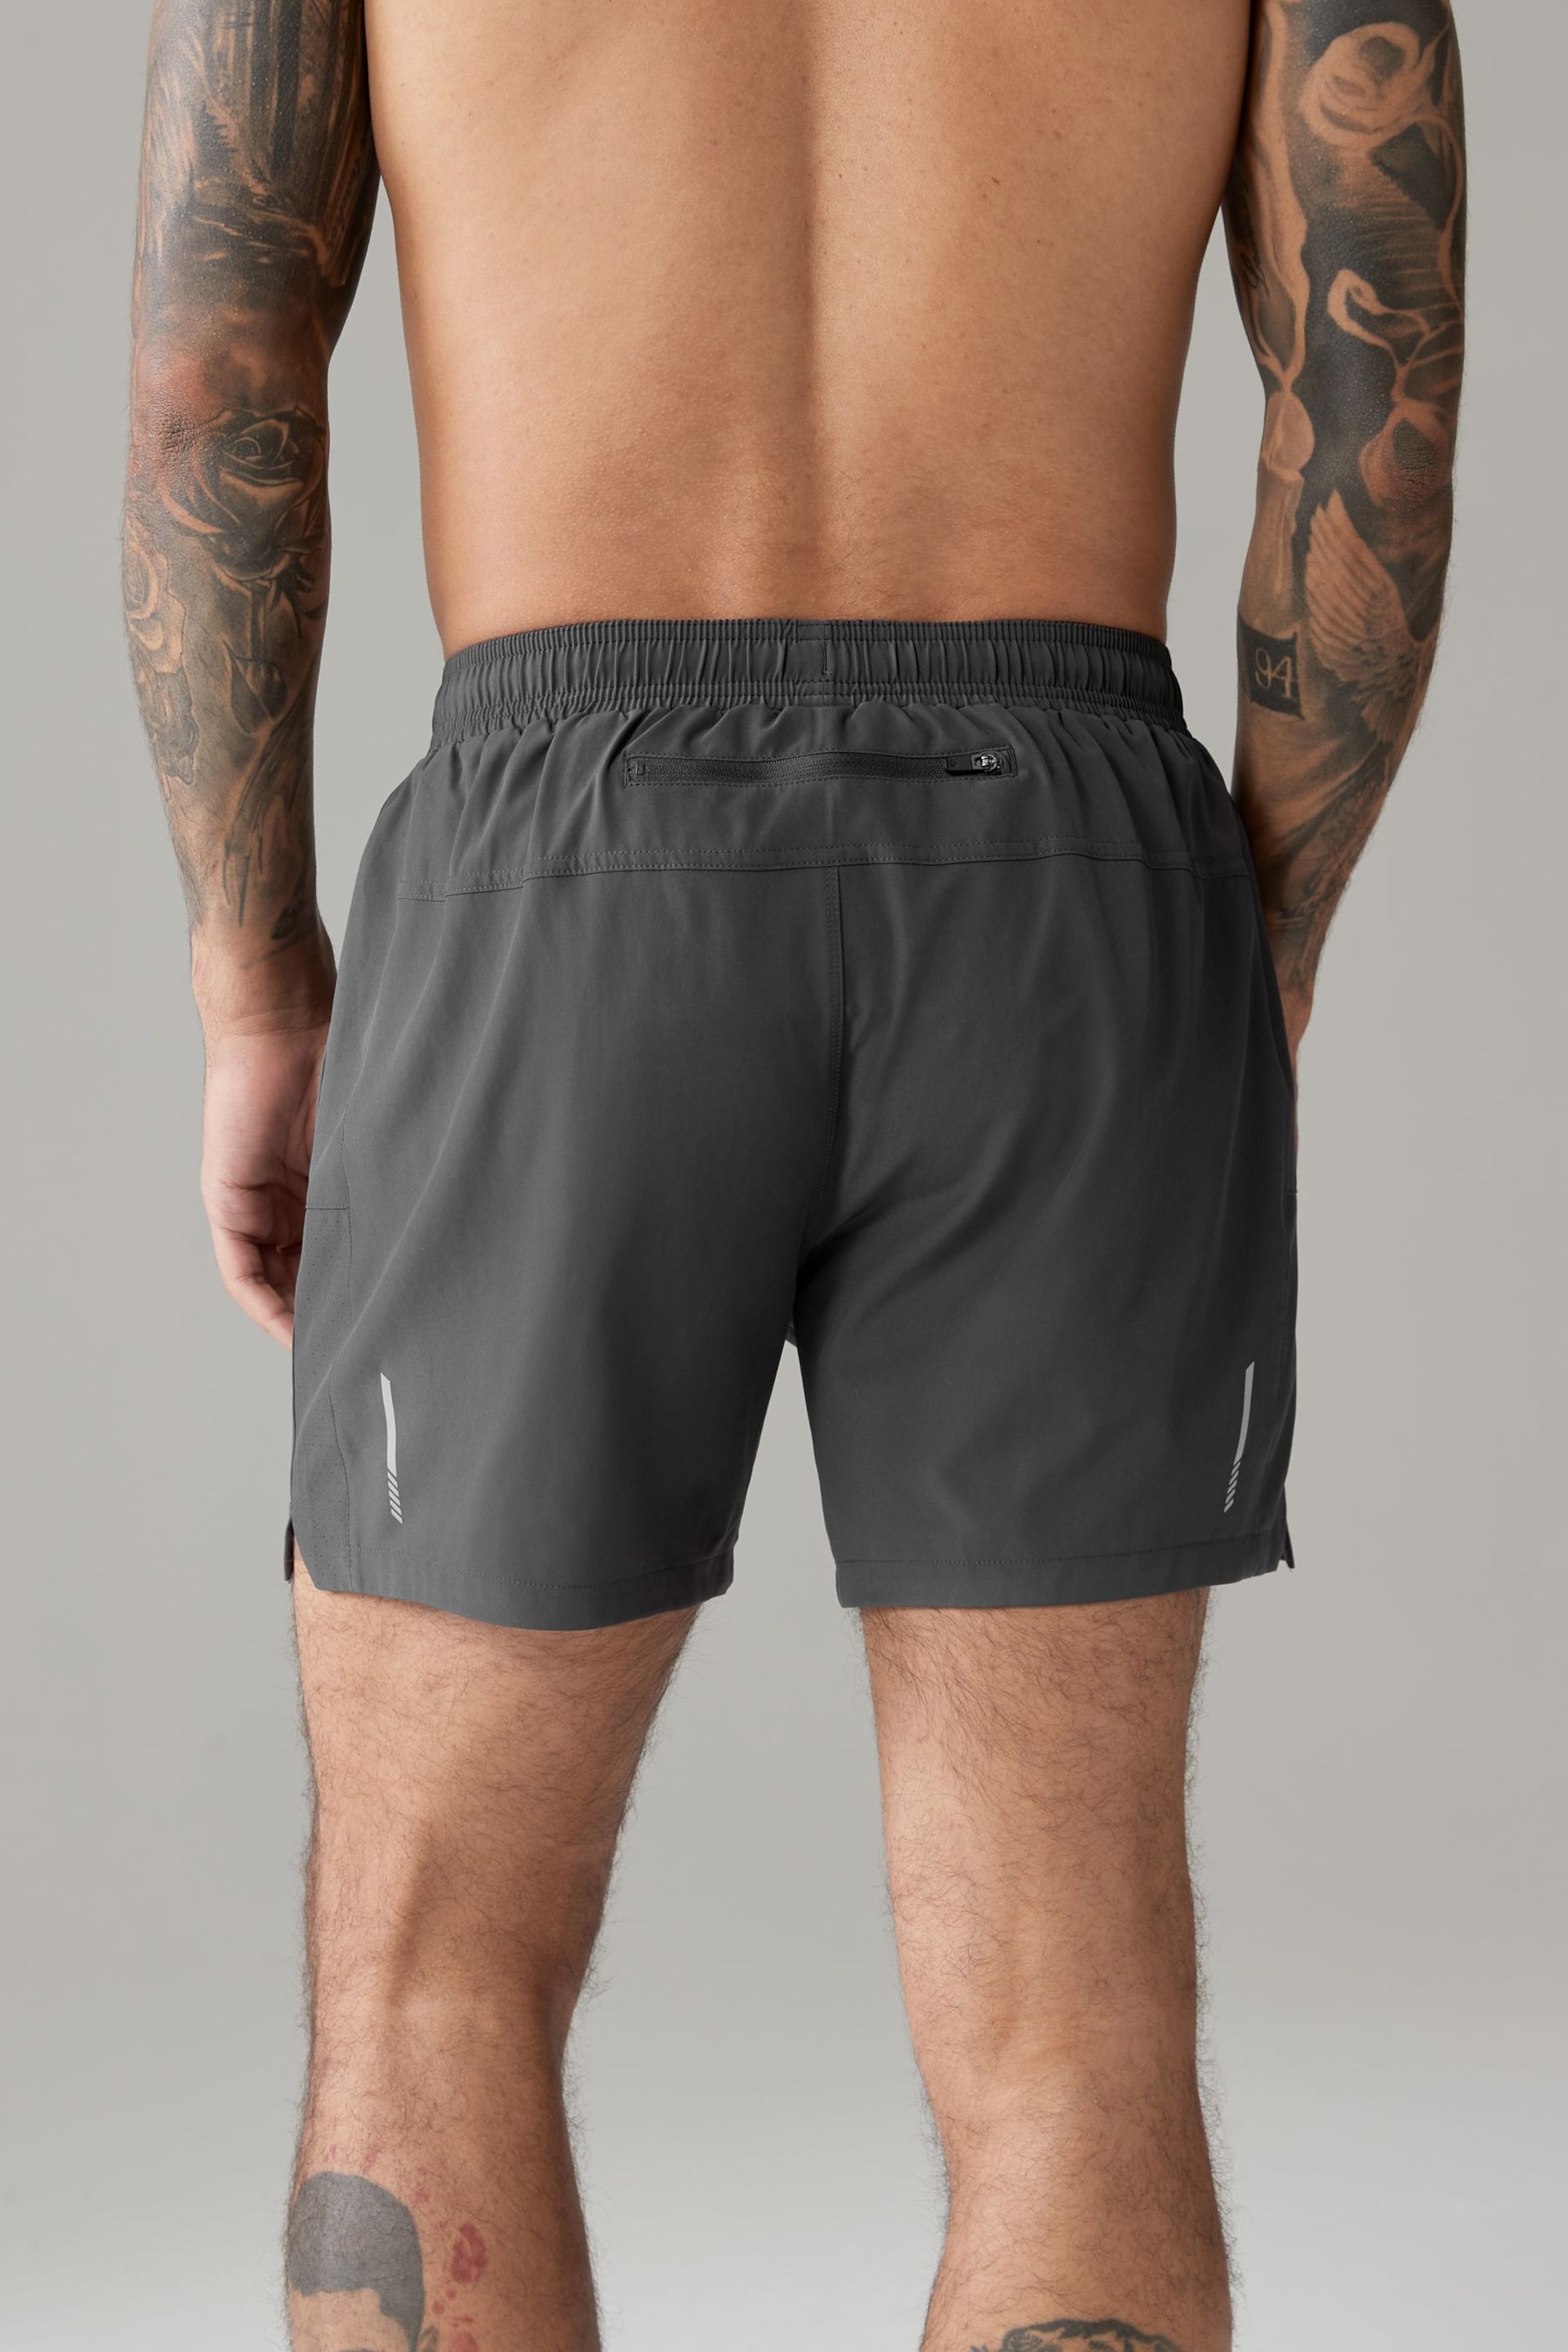 Slate Grey 7 Inch Active Gym Sports Shorts - Image 3 of 9